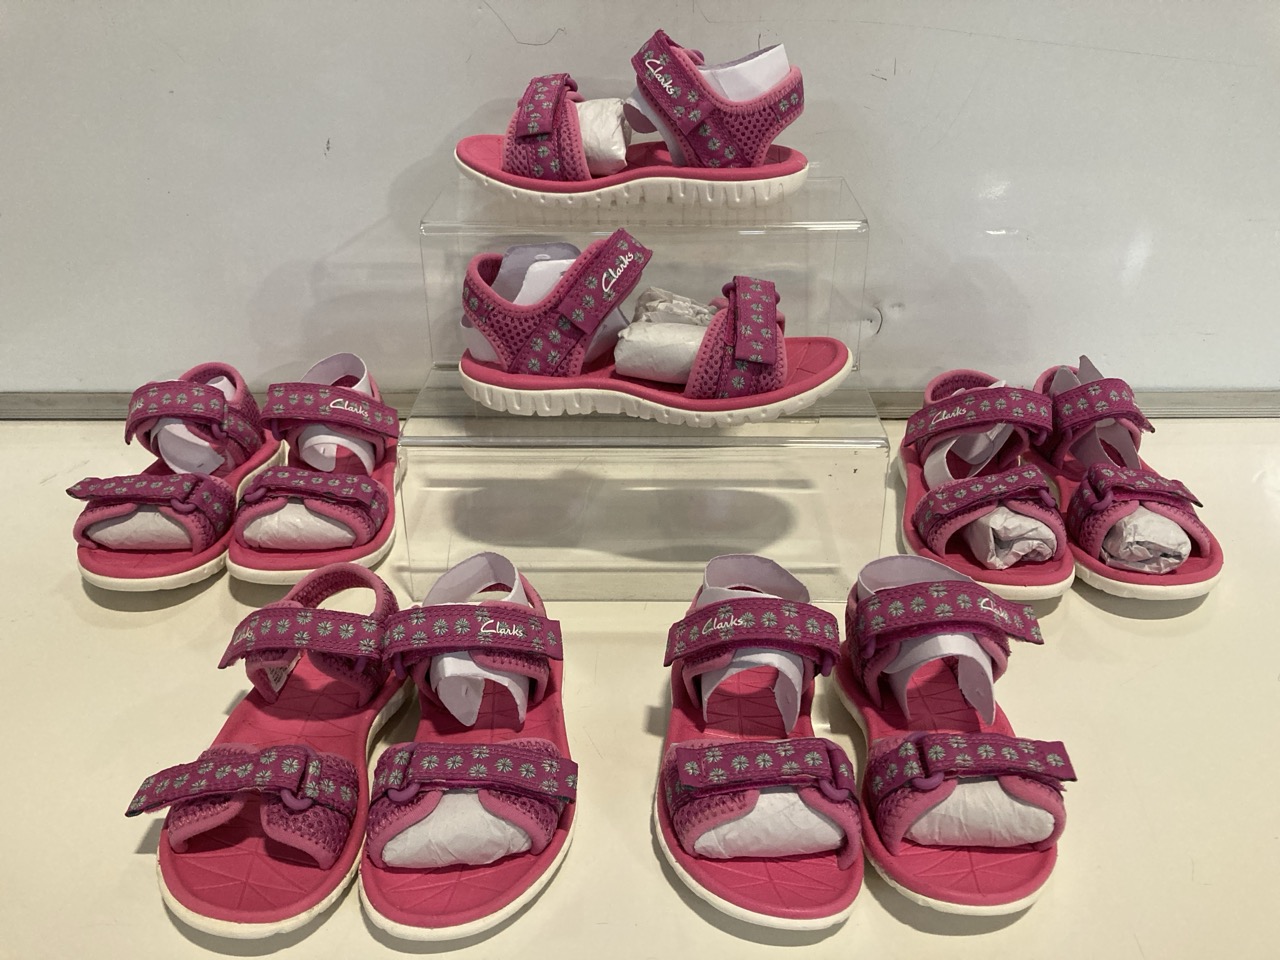 4 X PAIRS OF CLARKS CHILDREN'S FOOTWEAR, TO INCLUDE SURF TIDE SANDALS IN HOT PINK, UK SIZE 9.5